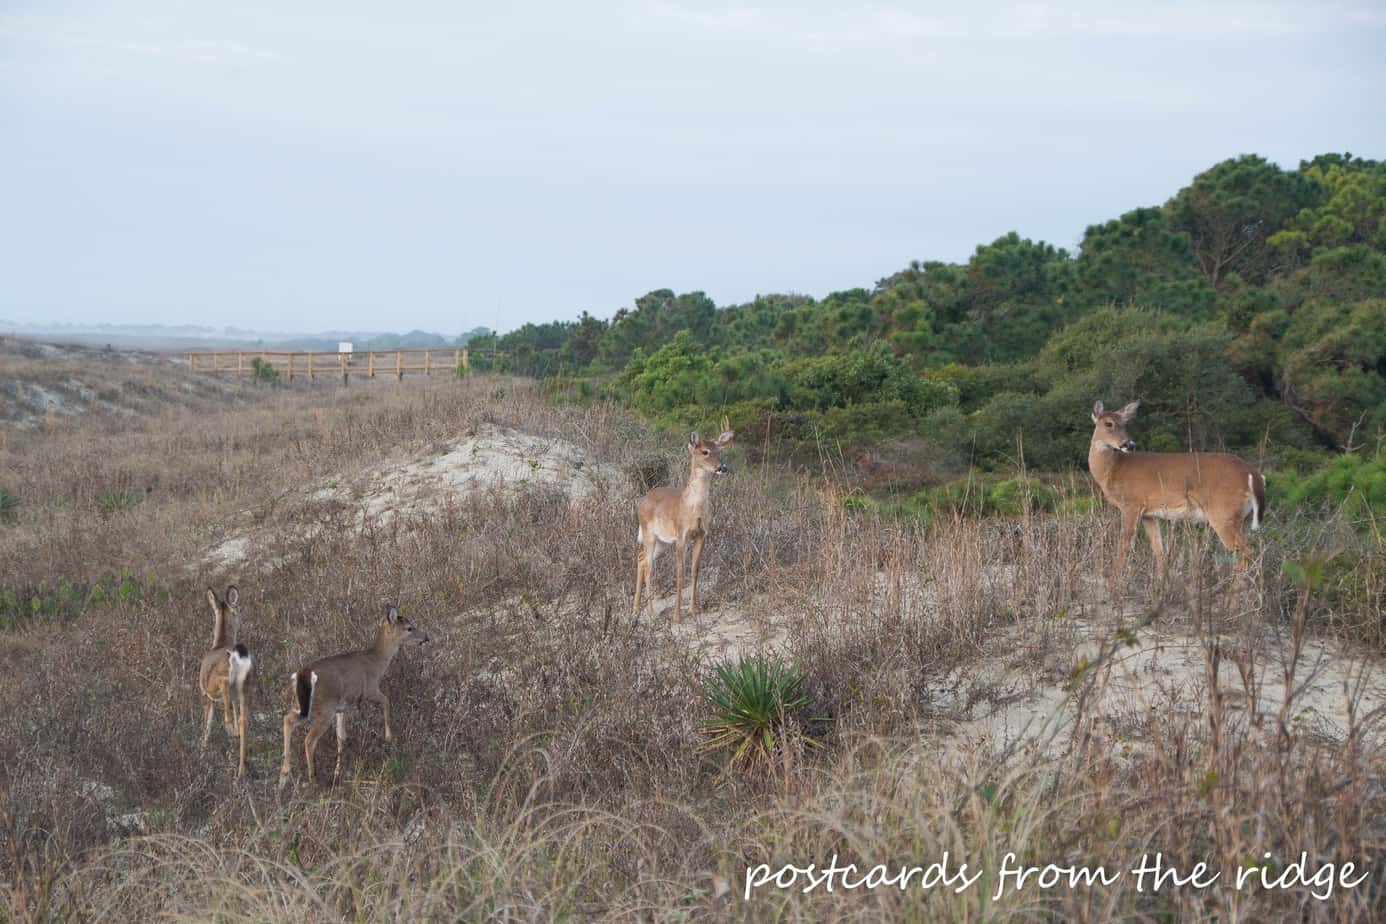 Deer grazing on the dunes at Kiawah Island, SC. Postcards from the Ridge.